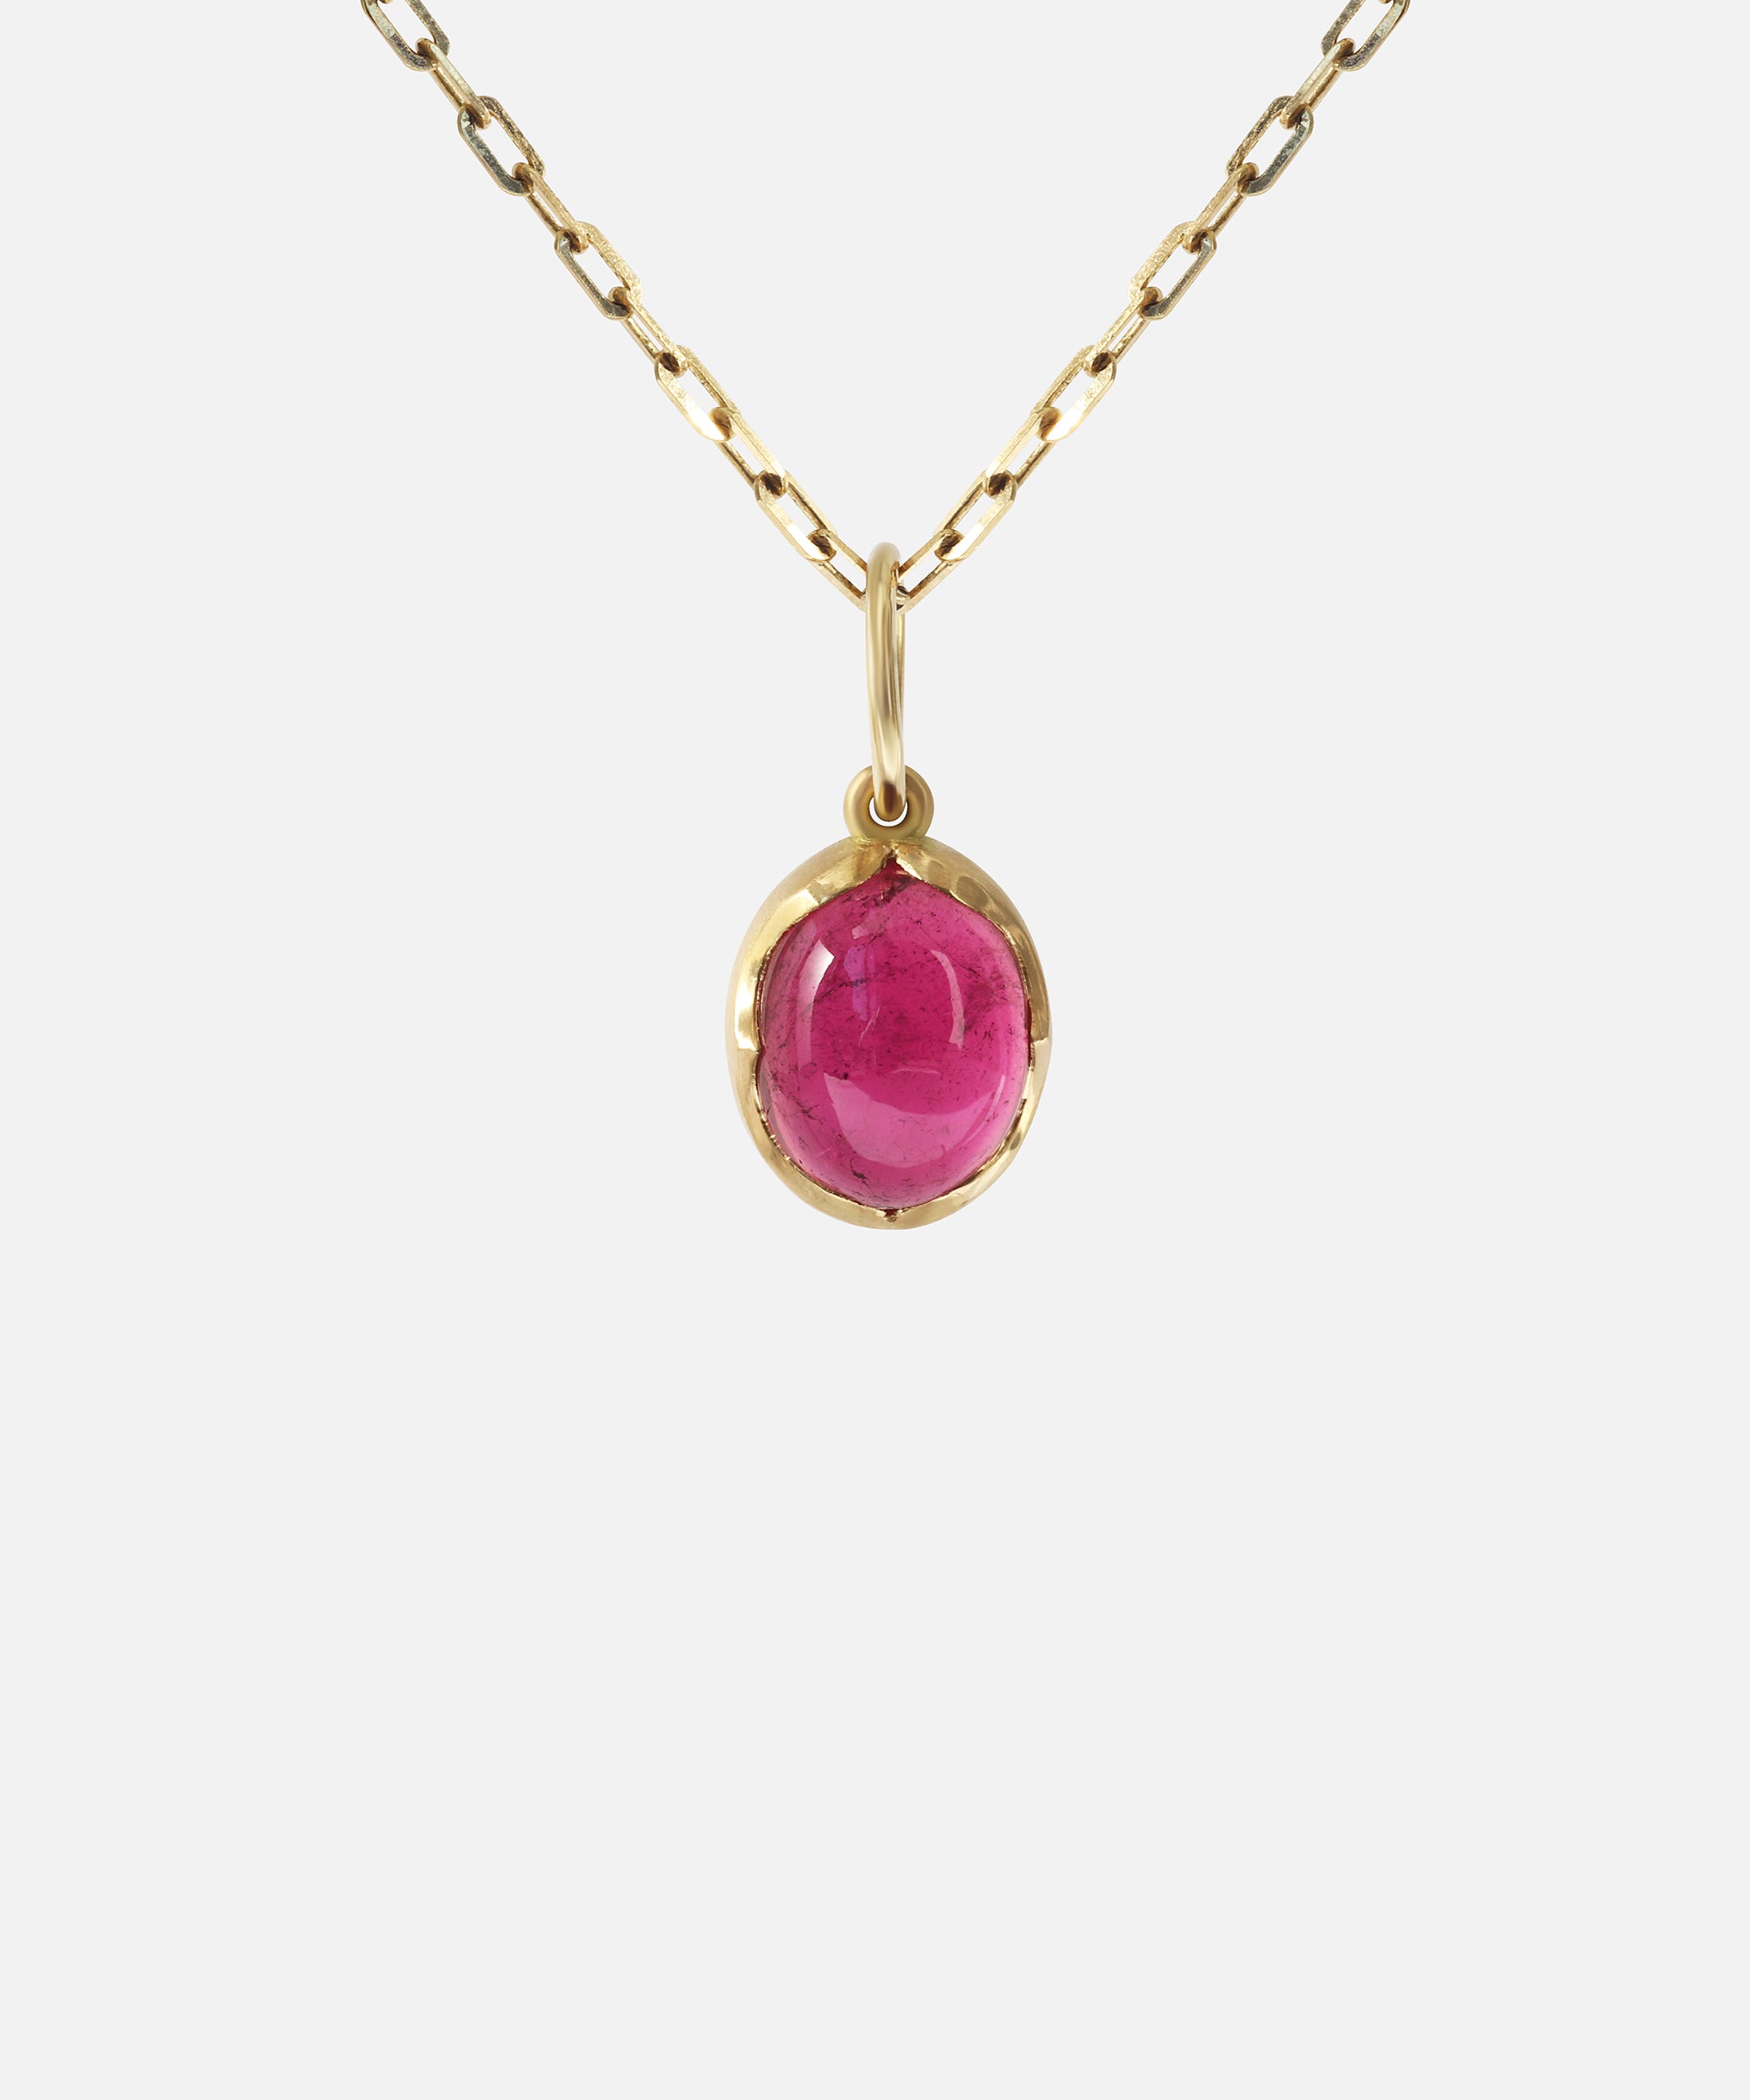 Pink Tourmaline and Small Paperclip / Necklace By Bree Altman in pendants Category